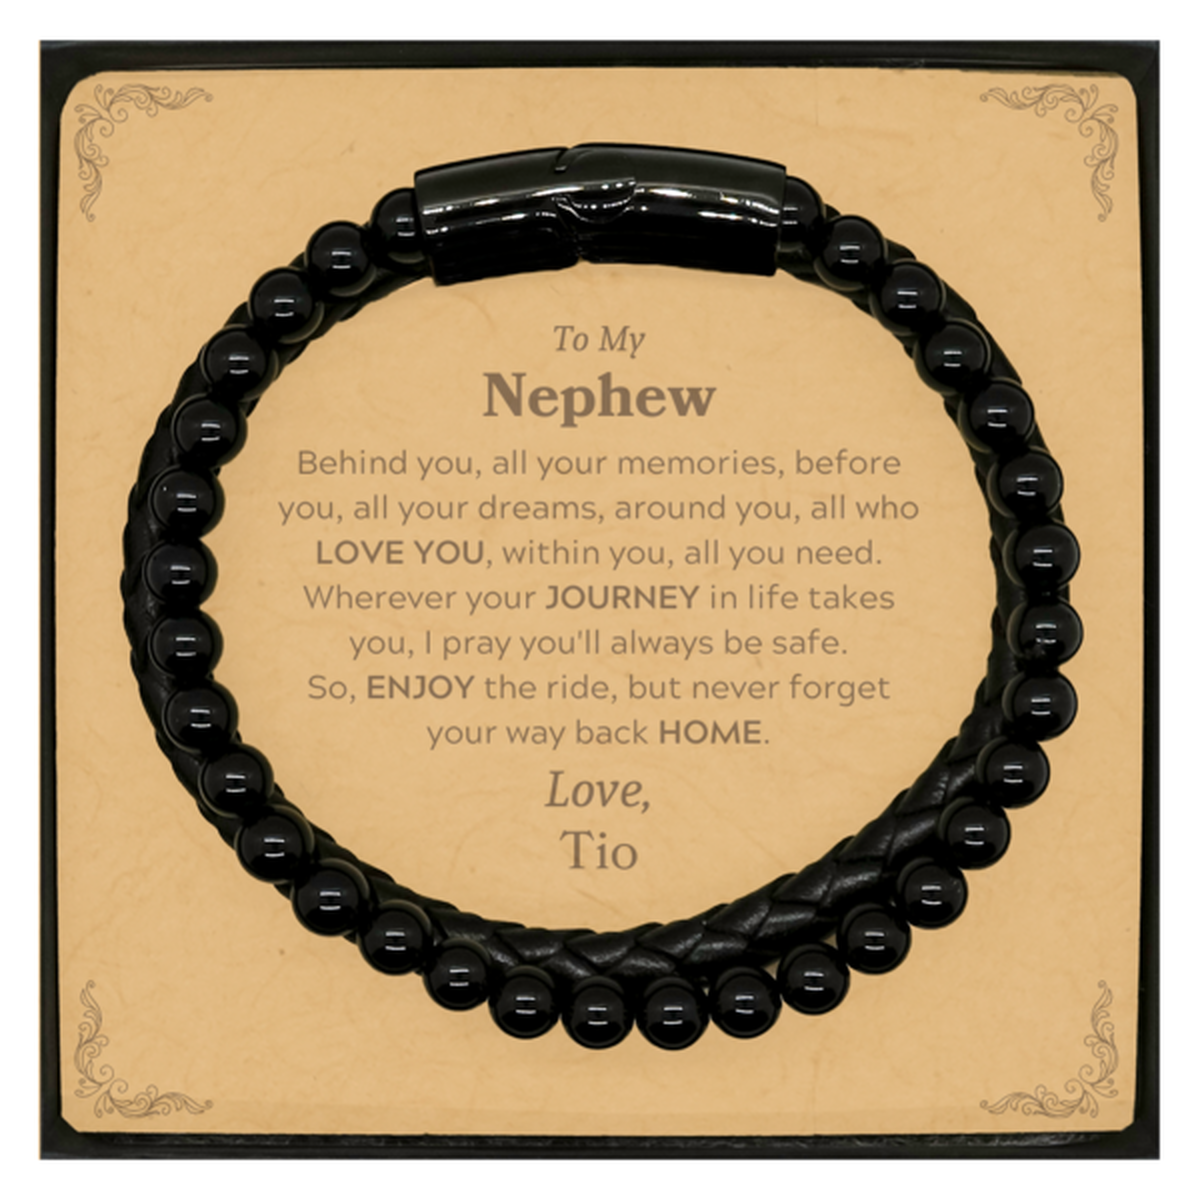 To My Nephew Graduation Gifts from Tio, Nephew Stone Leather Bracelets Christmas Birthday Gifts for Nephew Behind you, all your memories, before you, all your dreams. Love, Tio